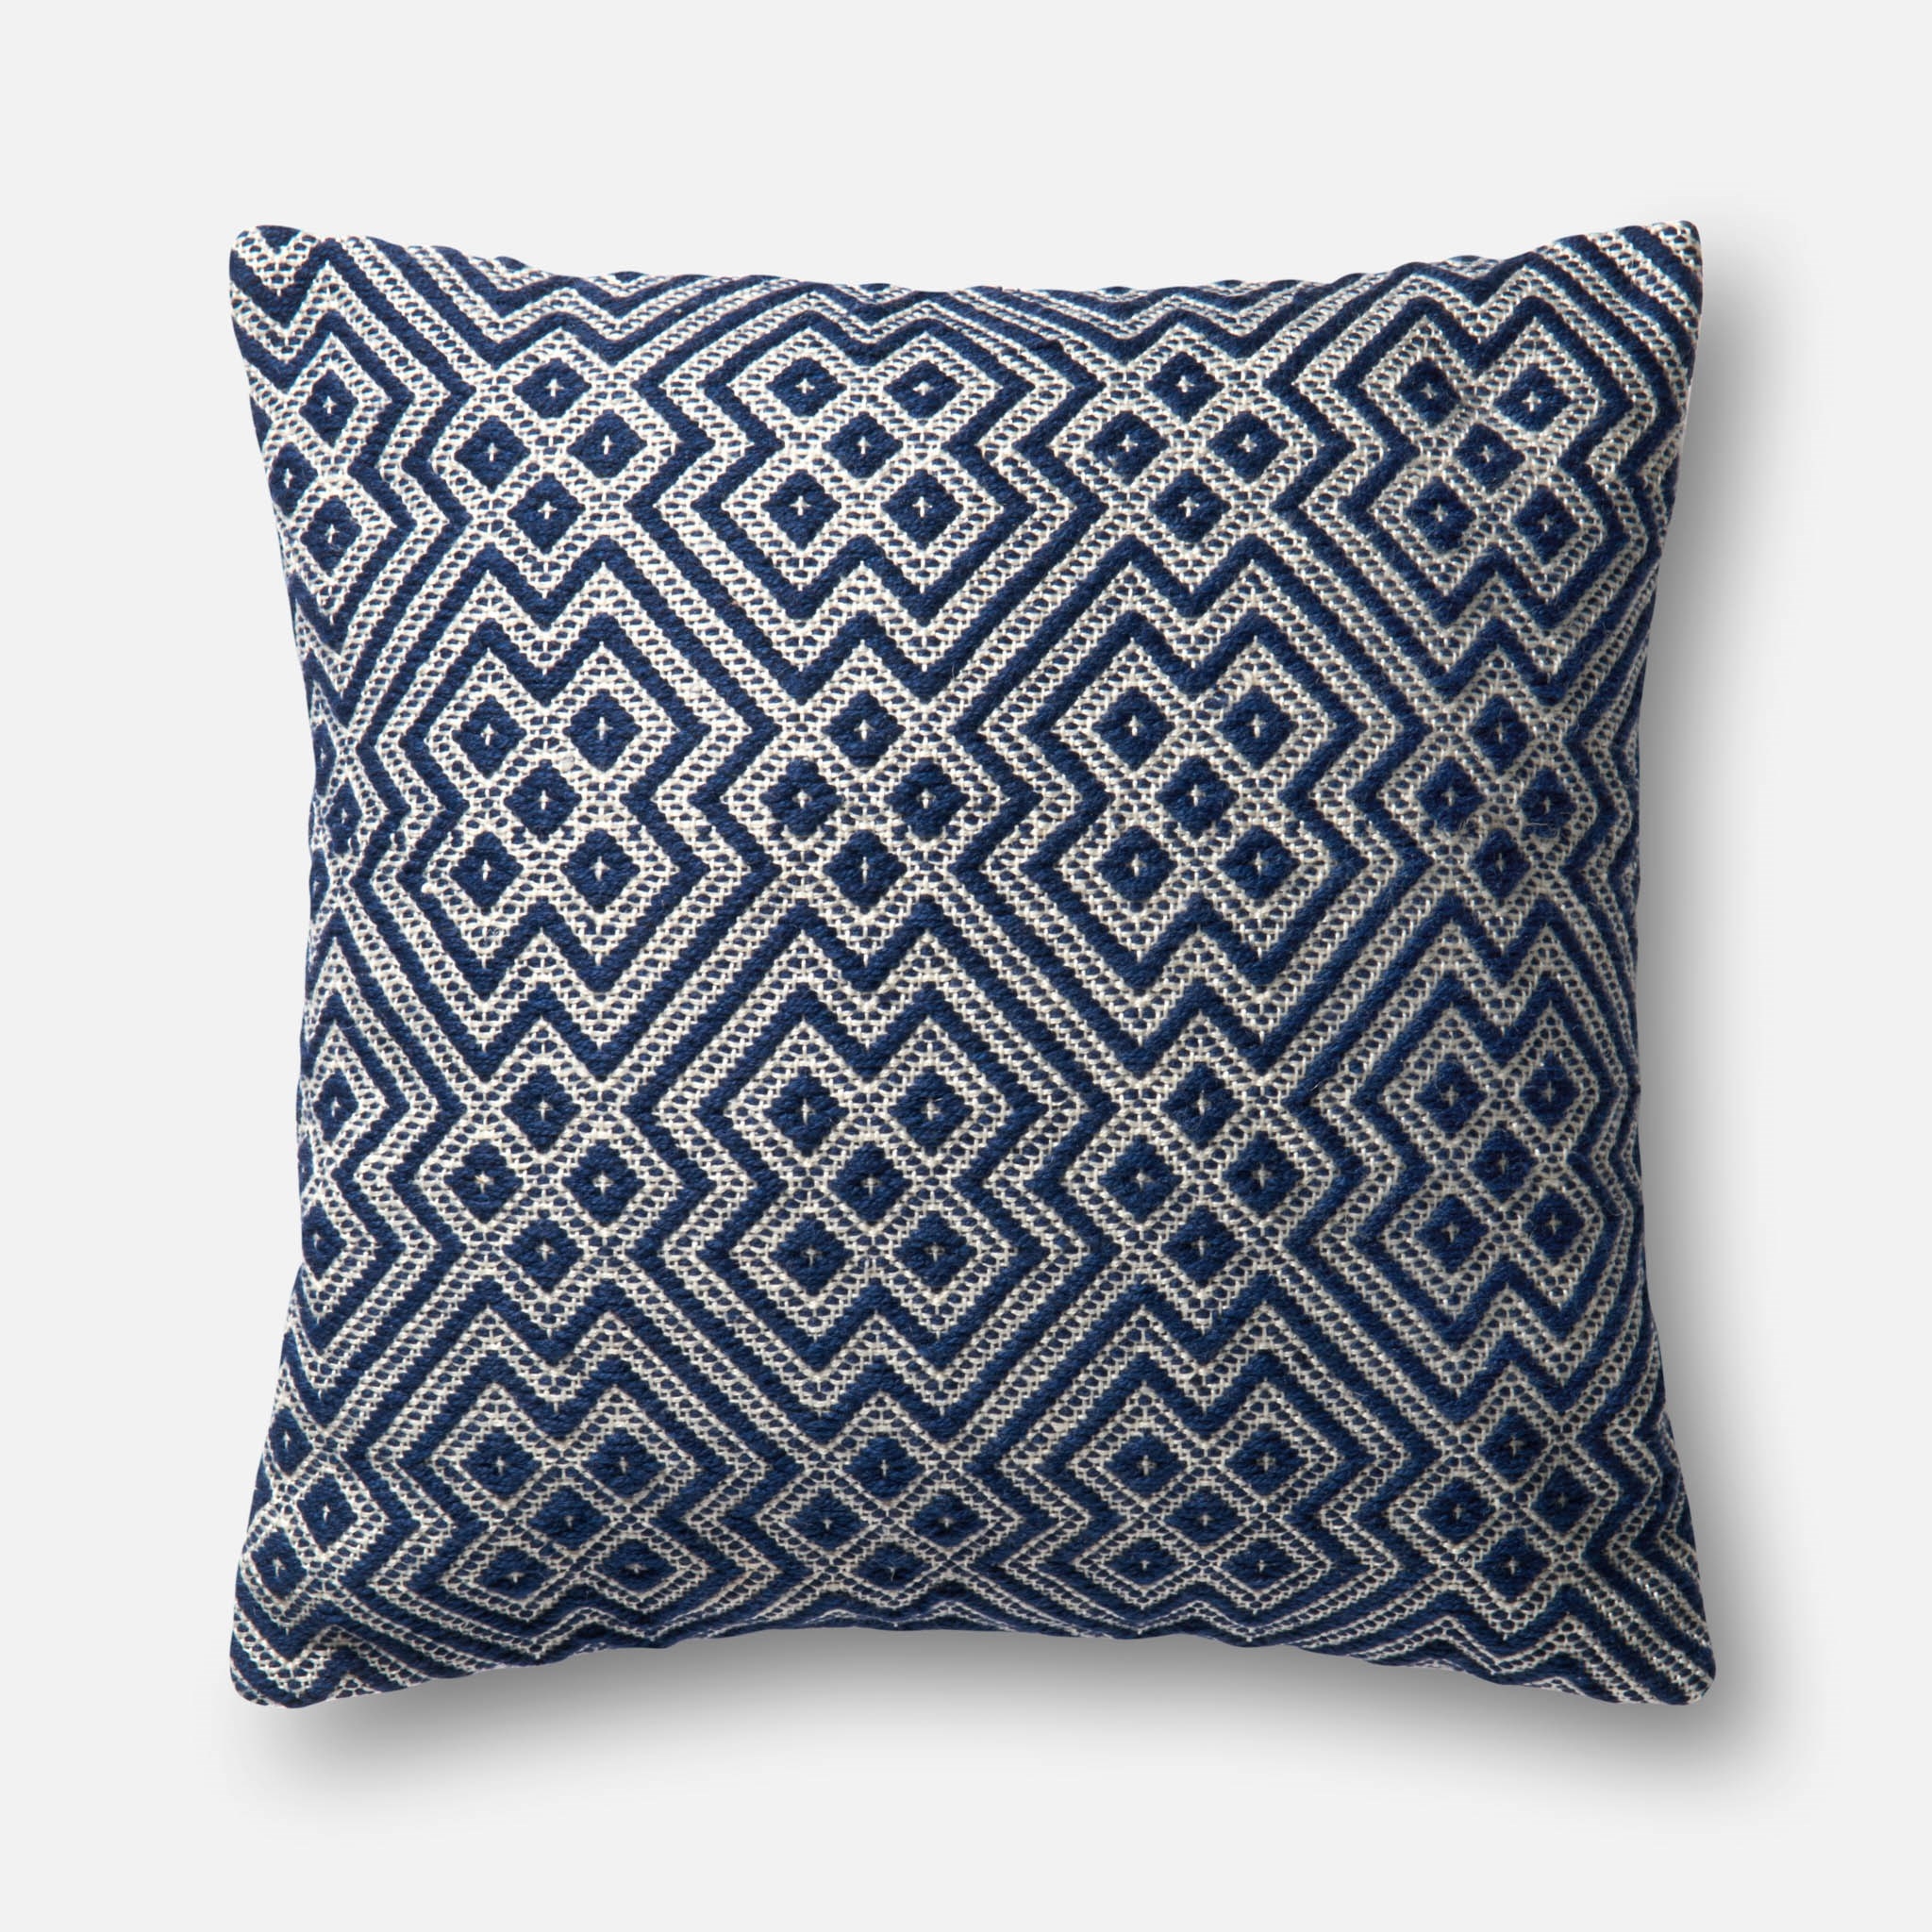 PILLOWS - NAVY / WHITE - 22" X 22" Cover Only - Image 0